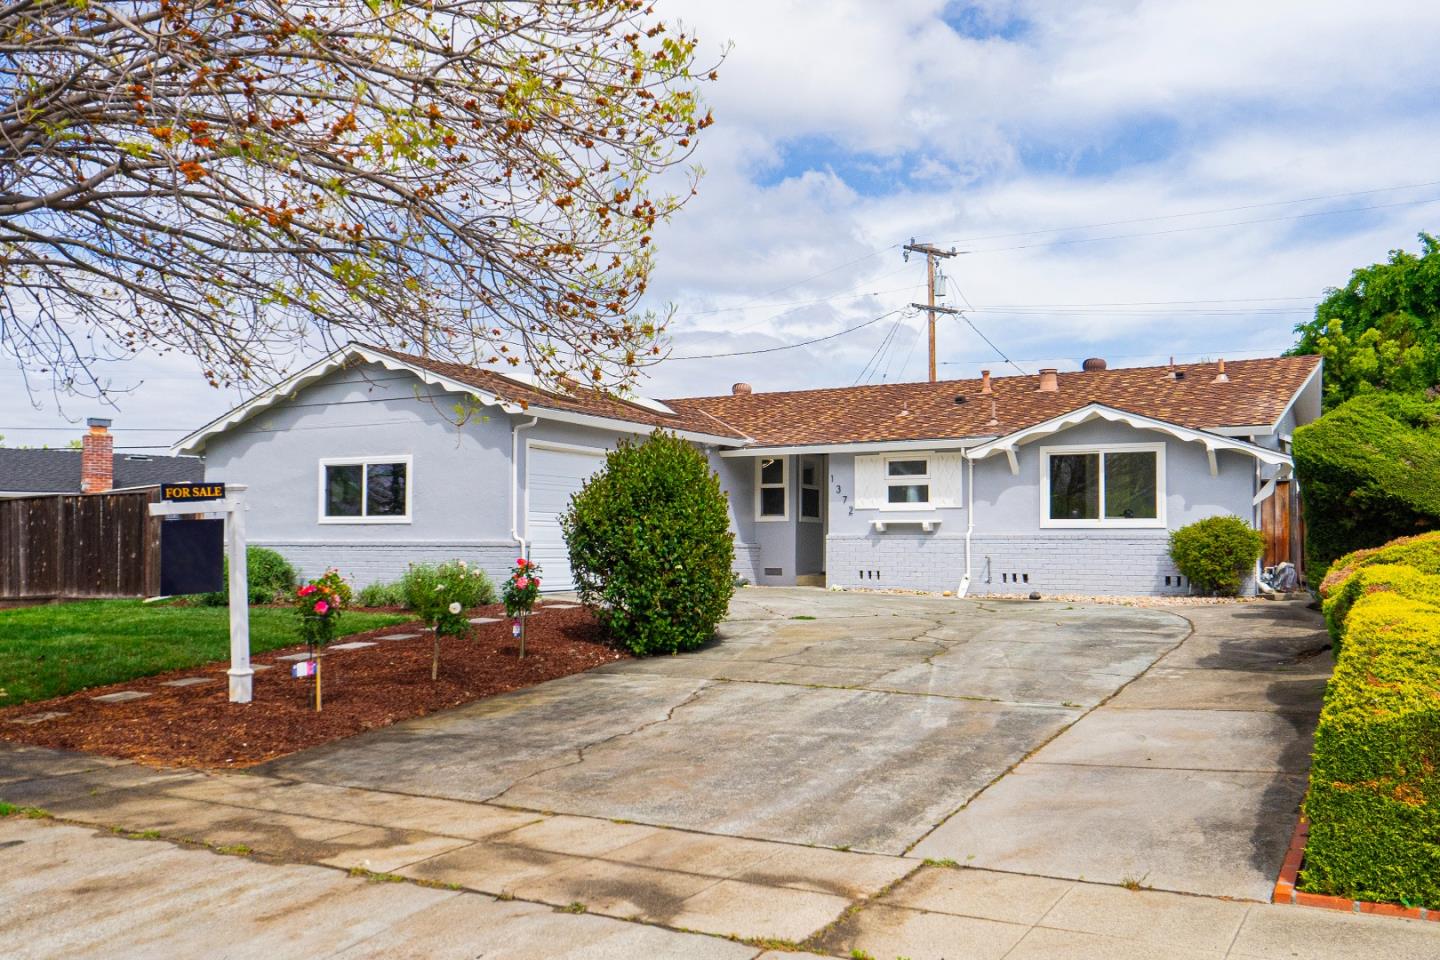 Photo of 1372 Heckman Wy in San Jose, CA